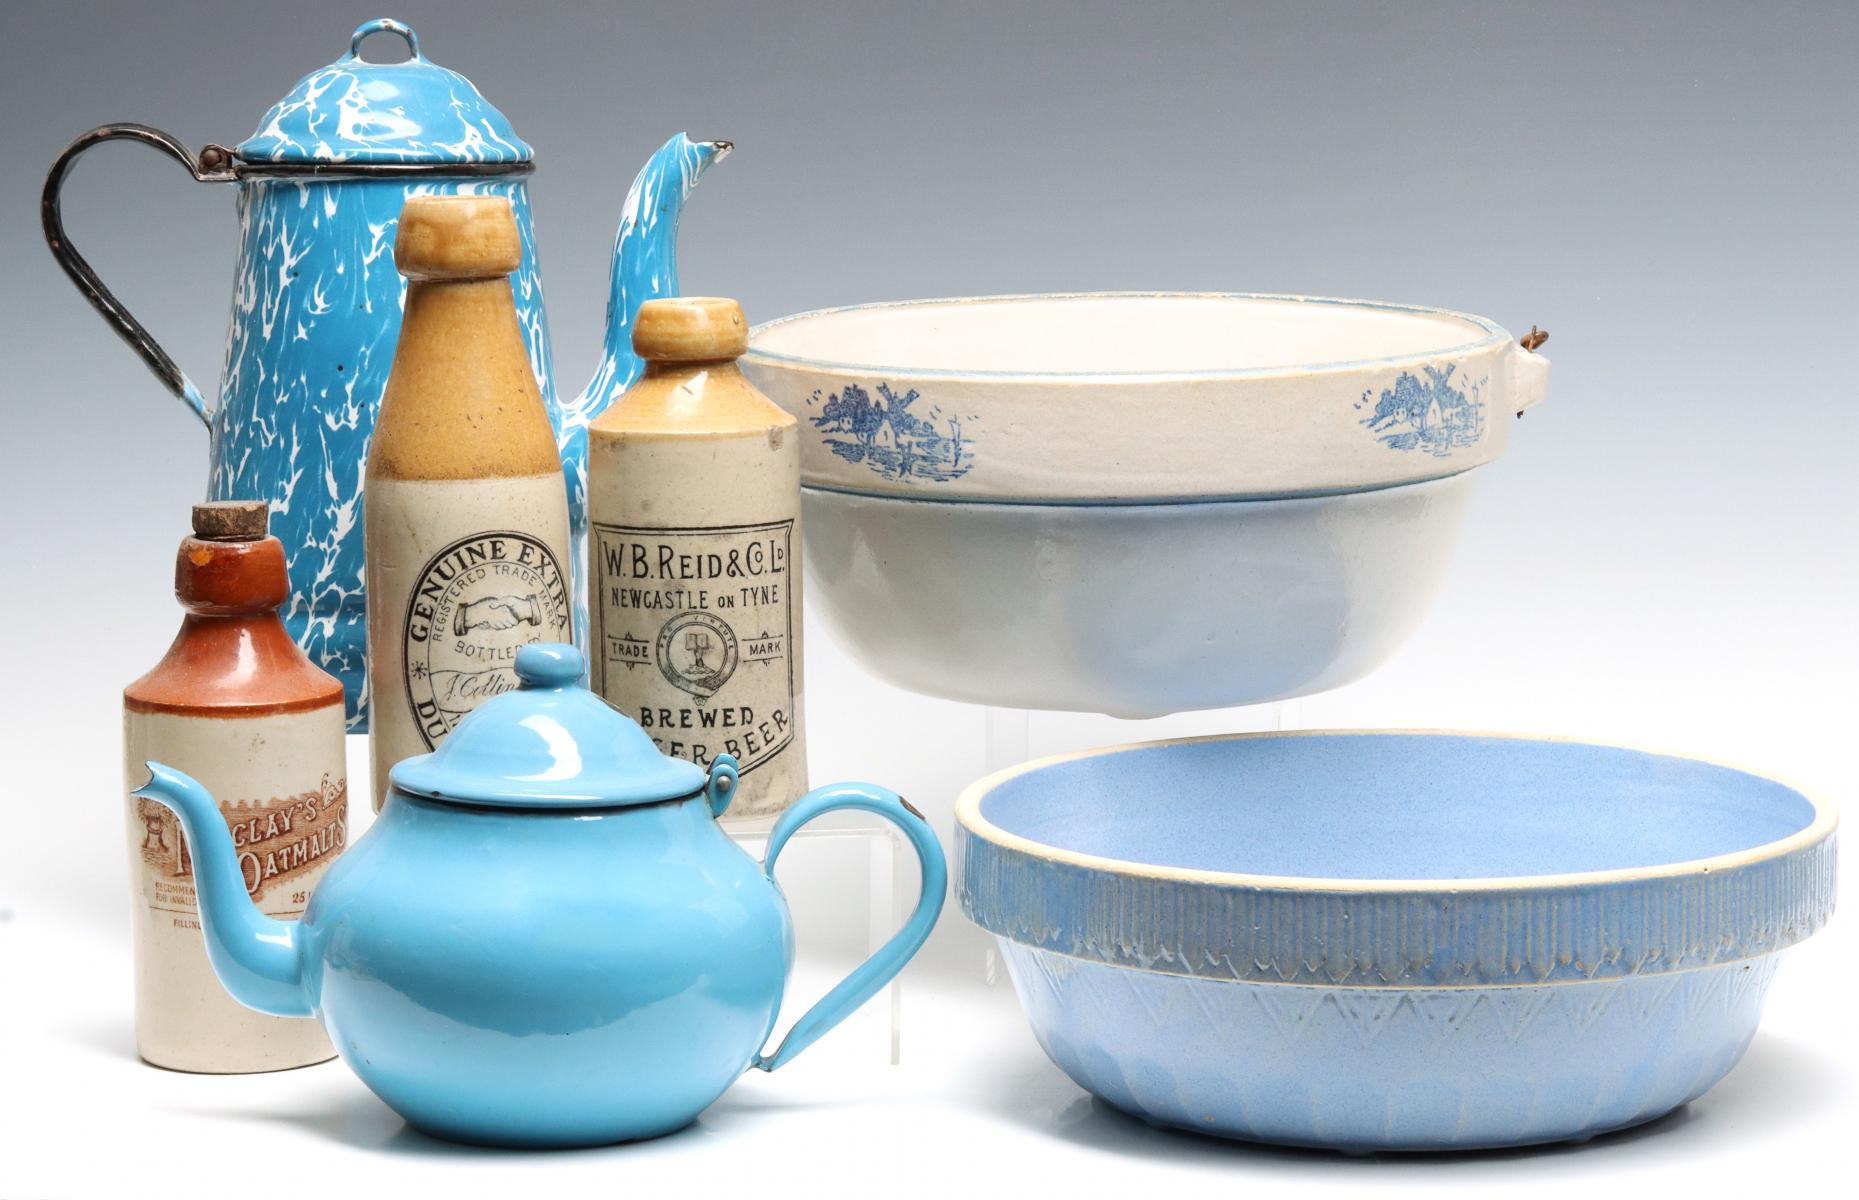 STONEWARE BOWLS AND BOTTLES WITH BLUE GRANITE WARE